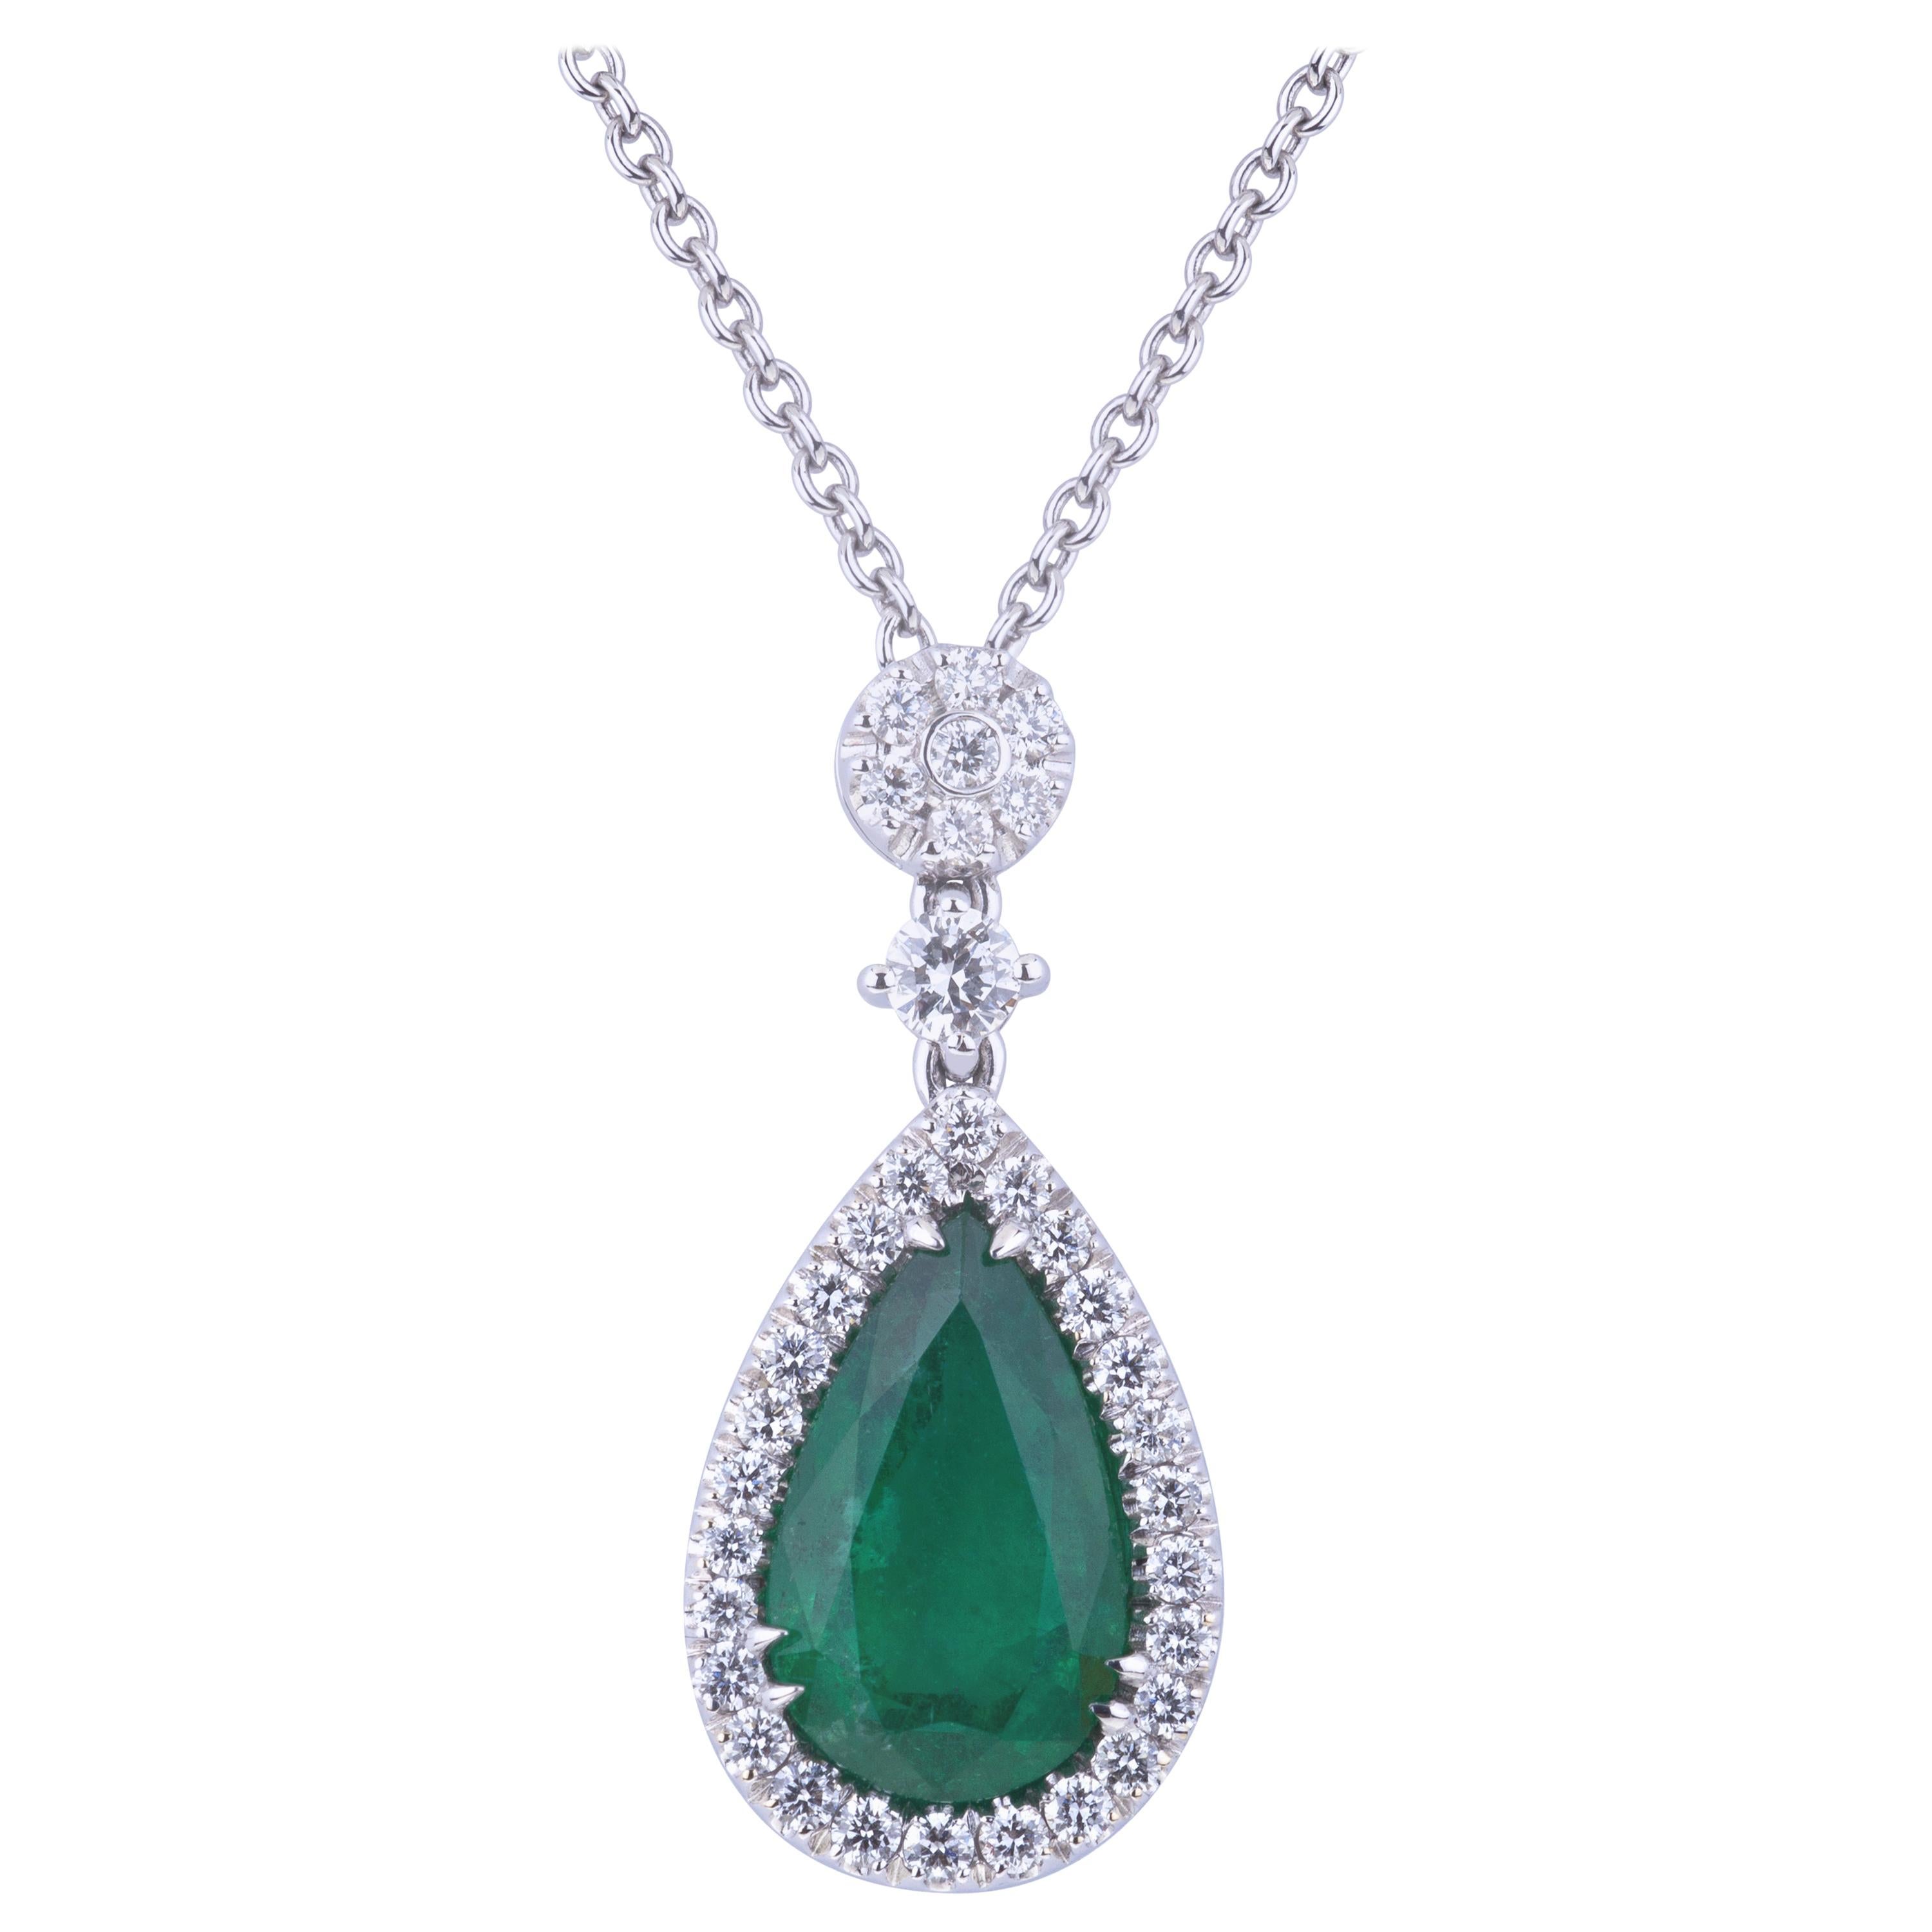 Pendant Drop Certified Emerald Necklace with Diamonds on Top and Chain For Sale